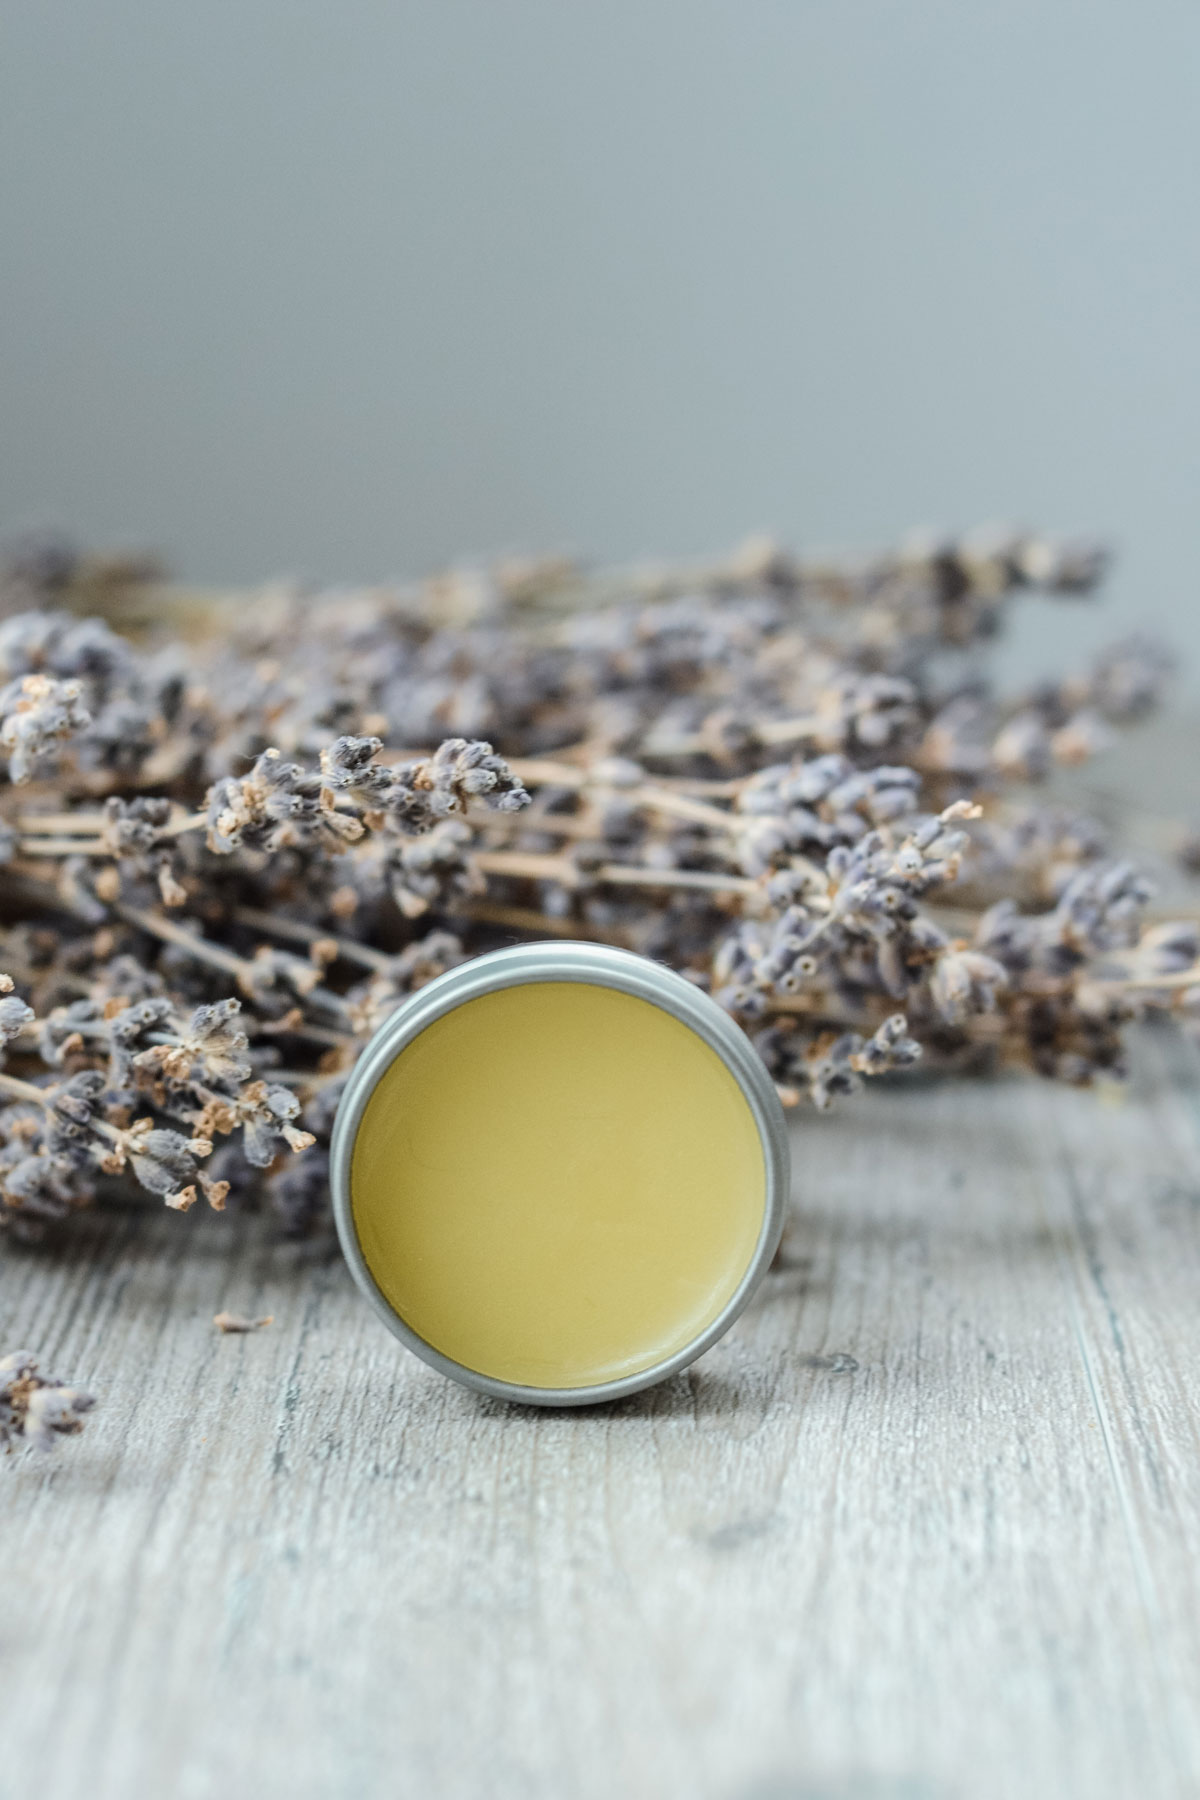 Stress-Be-Gone Balm Recipe (and Video!)  | Herbal Academy | This Stress-Relief Balm recipe is adapted from the Herbal Academy’s Intermediate Herbal Course and features calming essential oils in an herb-infused base.